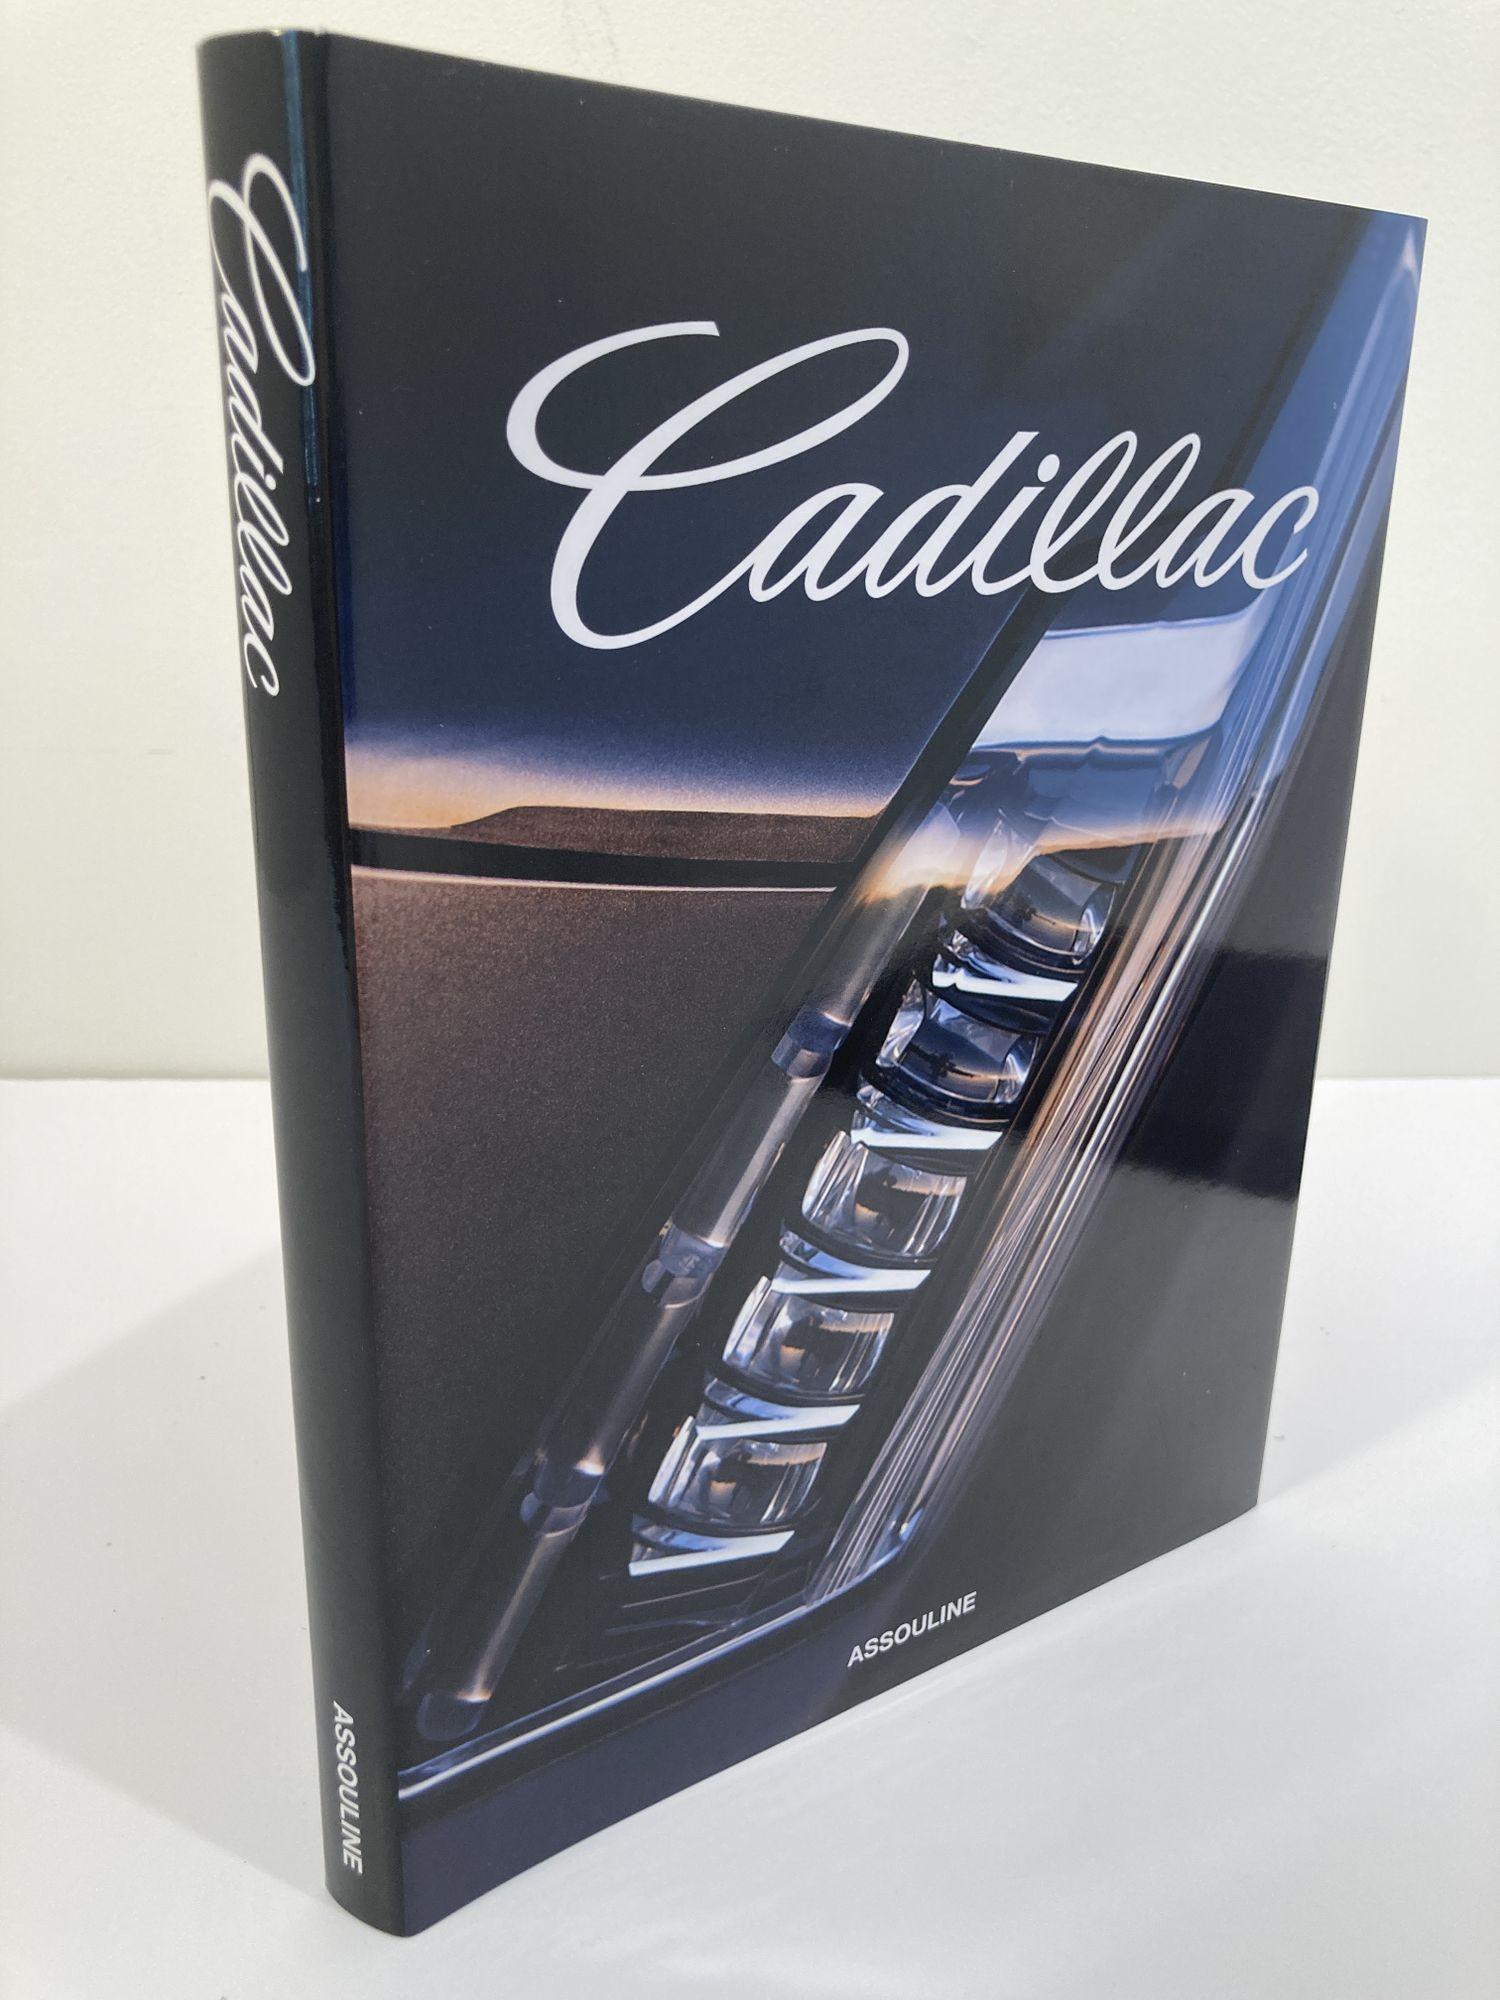 Cadillac Limited Edition: 110 Years by Assouline.

Kremer, Esther, Ed.

New York: Assouline Publishing, 2012. 
First Edition; Second Printing. Hardcover. 
In celebration of 110 years of one of the most iconic brands in the world, Assouline